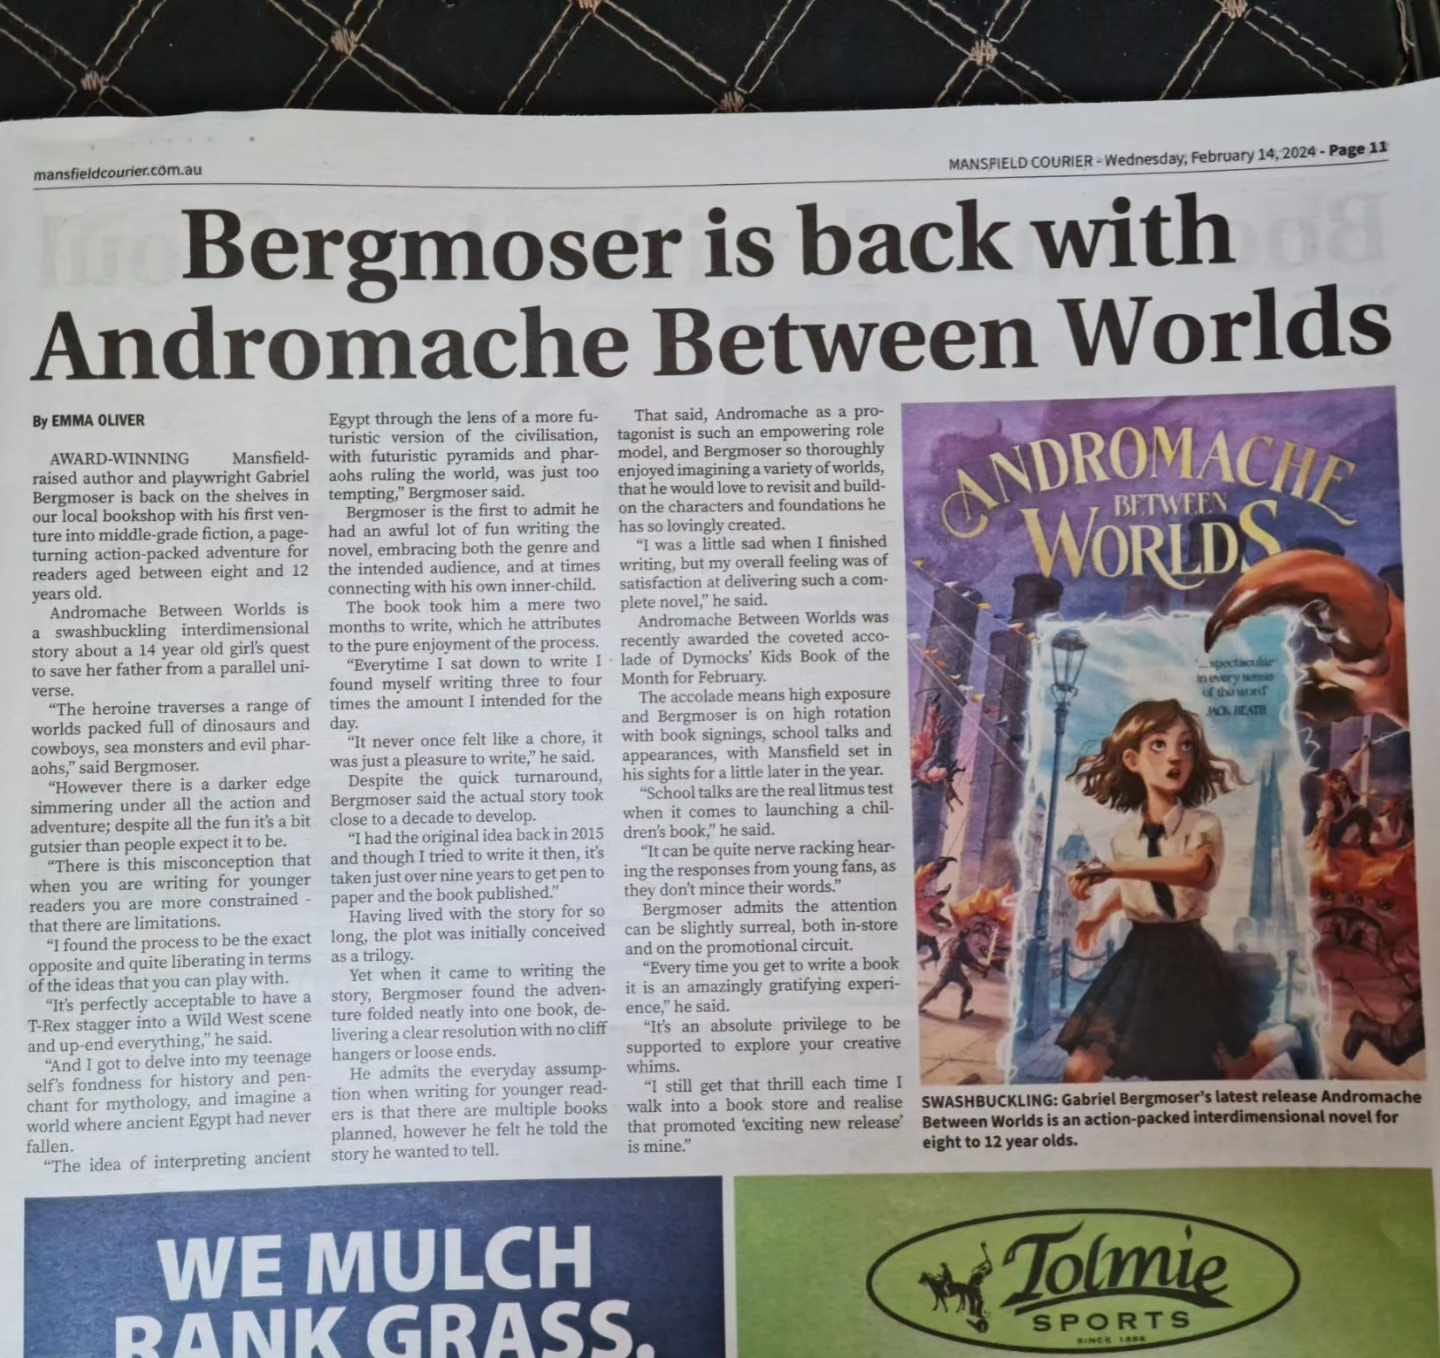 May be an image of text that says "mansfieldcourier.com.au Wednesday Bergmoser is back with Andromache Between Worlds the WORLDS NDROMACHE BETWEEN interpreting ancient creative that exciting SWASHBUCKLING: release' Bergmoser WE MULCH DANK GRASS xTolmie SPORTS"